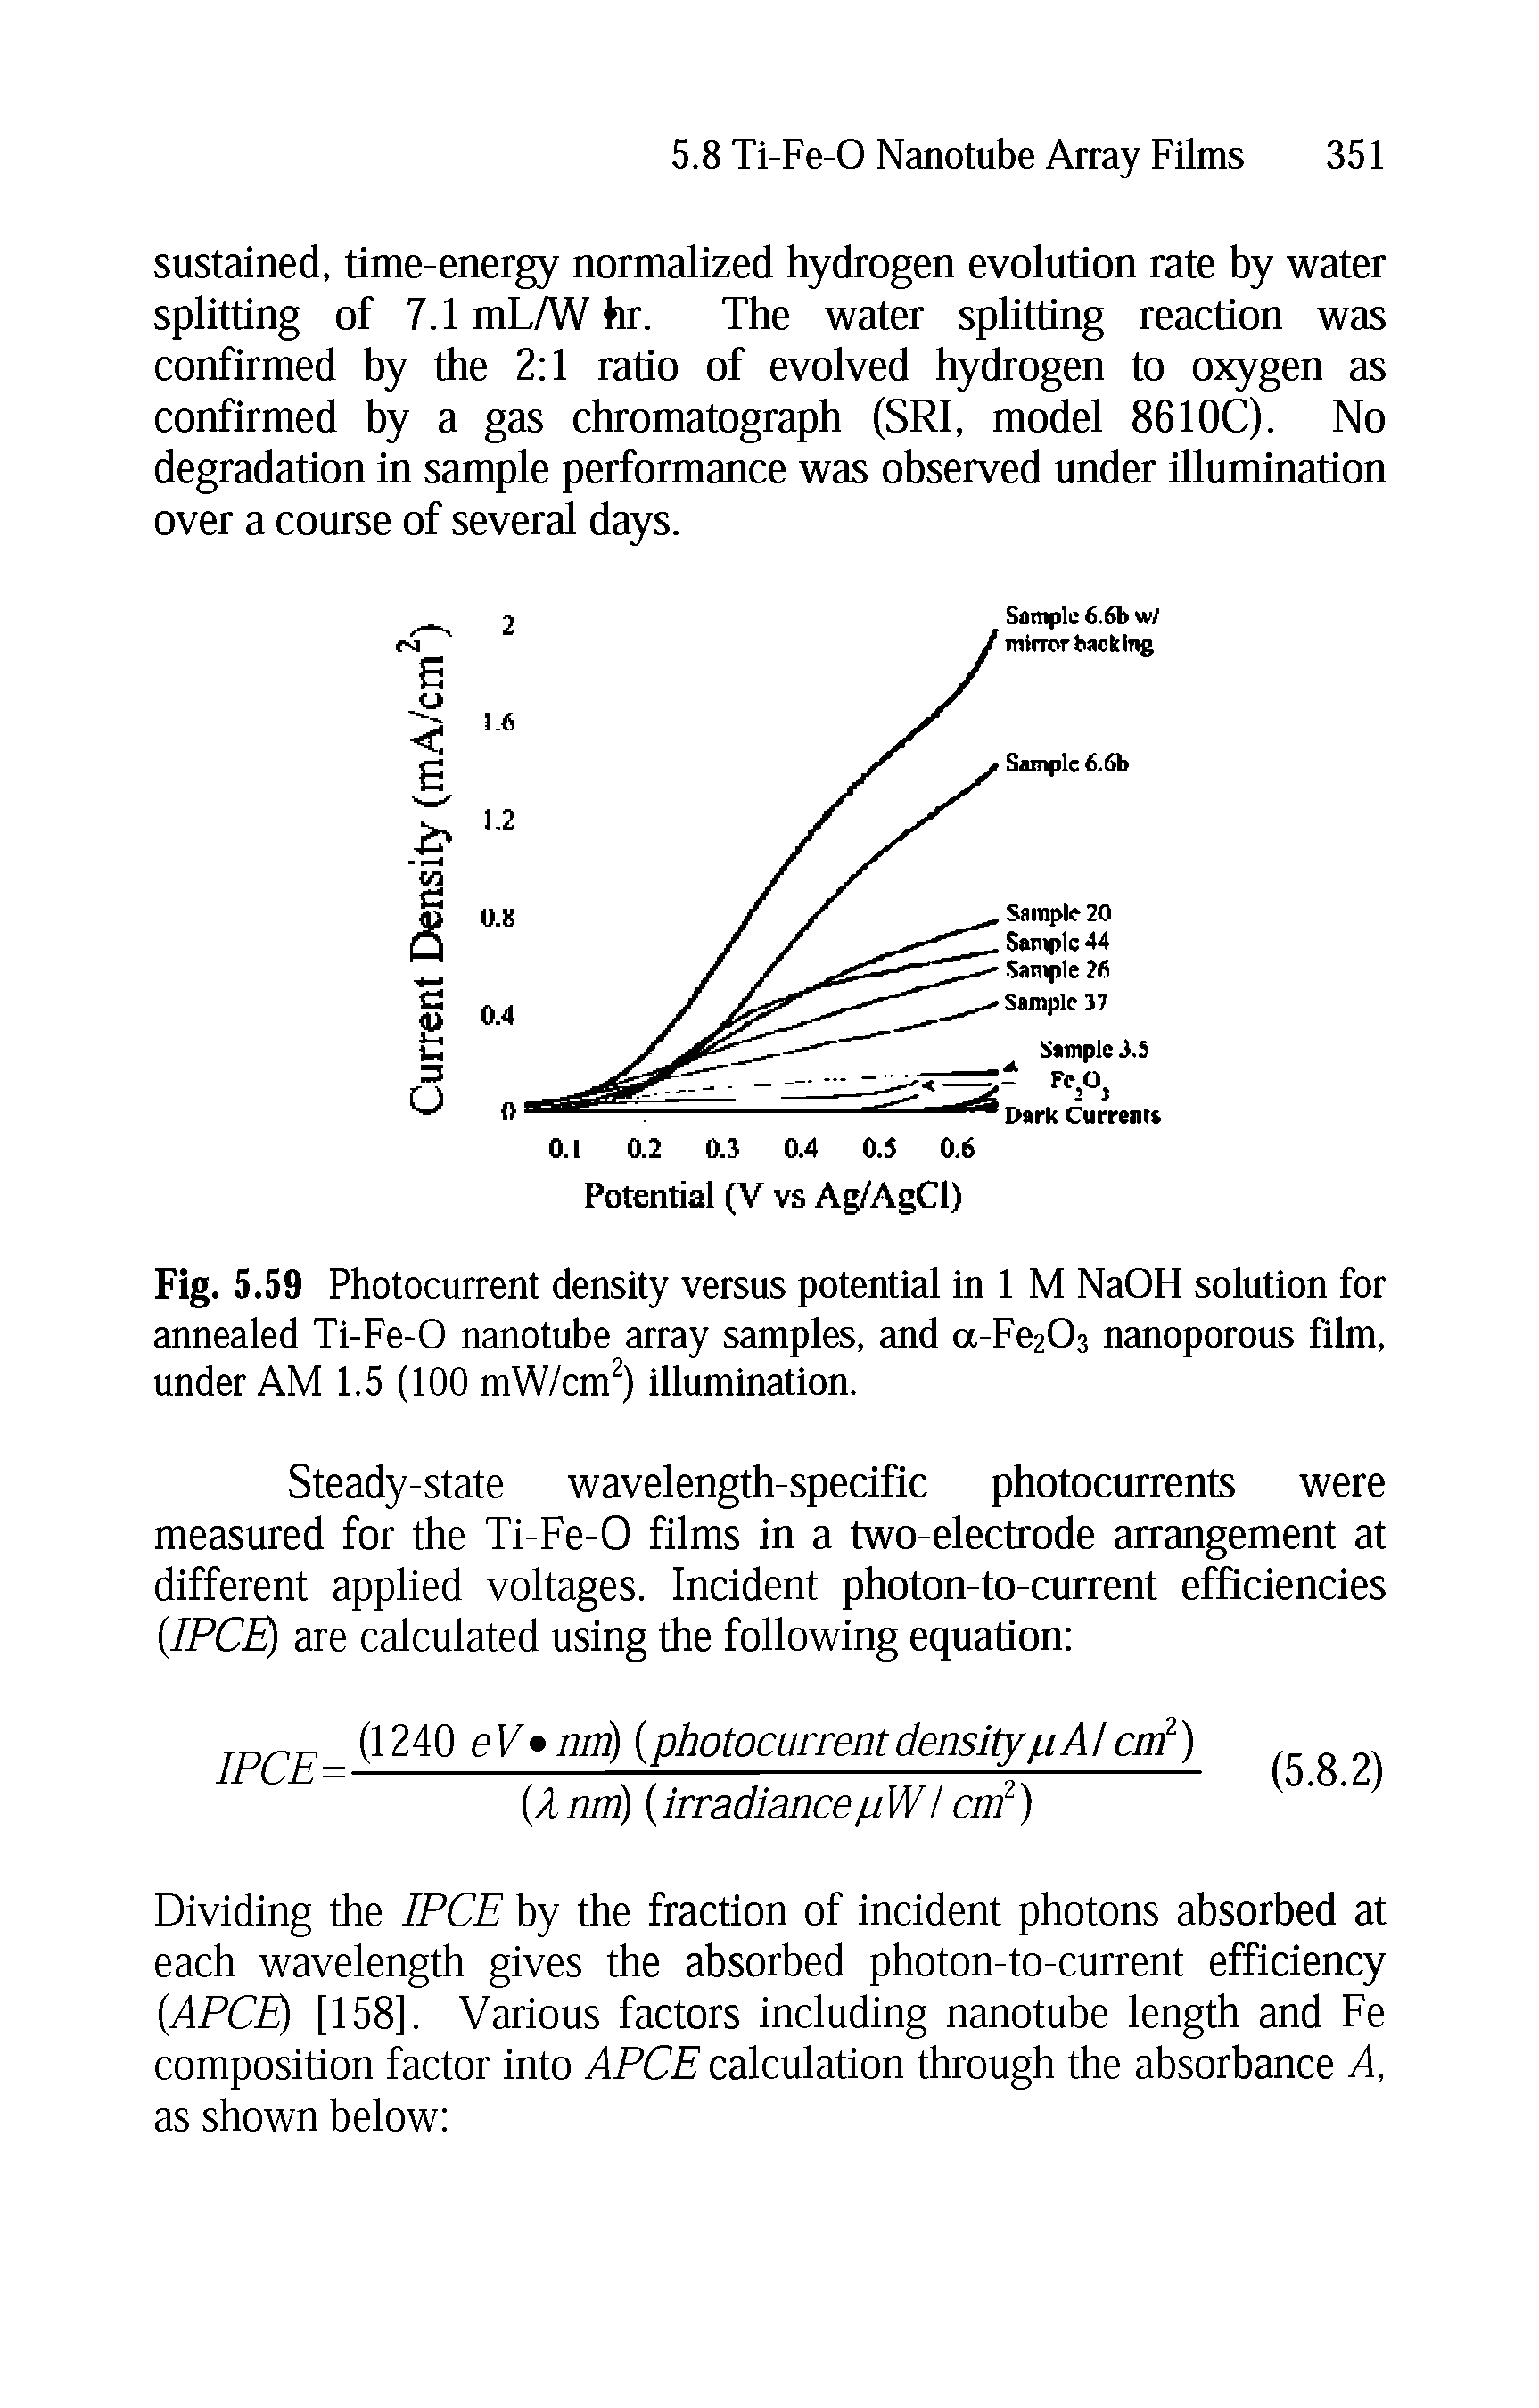 Fig. 5.59 Photocurrent density versus potential in 1 M NaOH solution for annealed Ti-Fe-0 nanotube array samples, and a-FezOs nanoporous film, under AM 1.5 (100 mW/cm ) illumination.